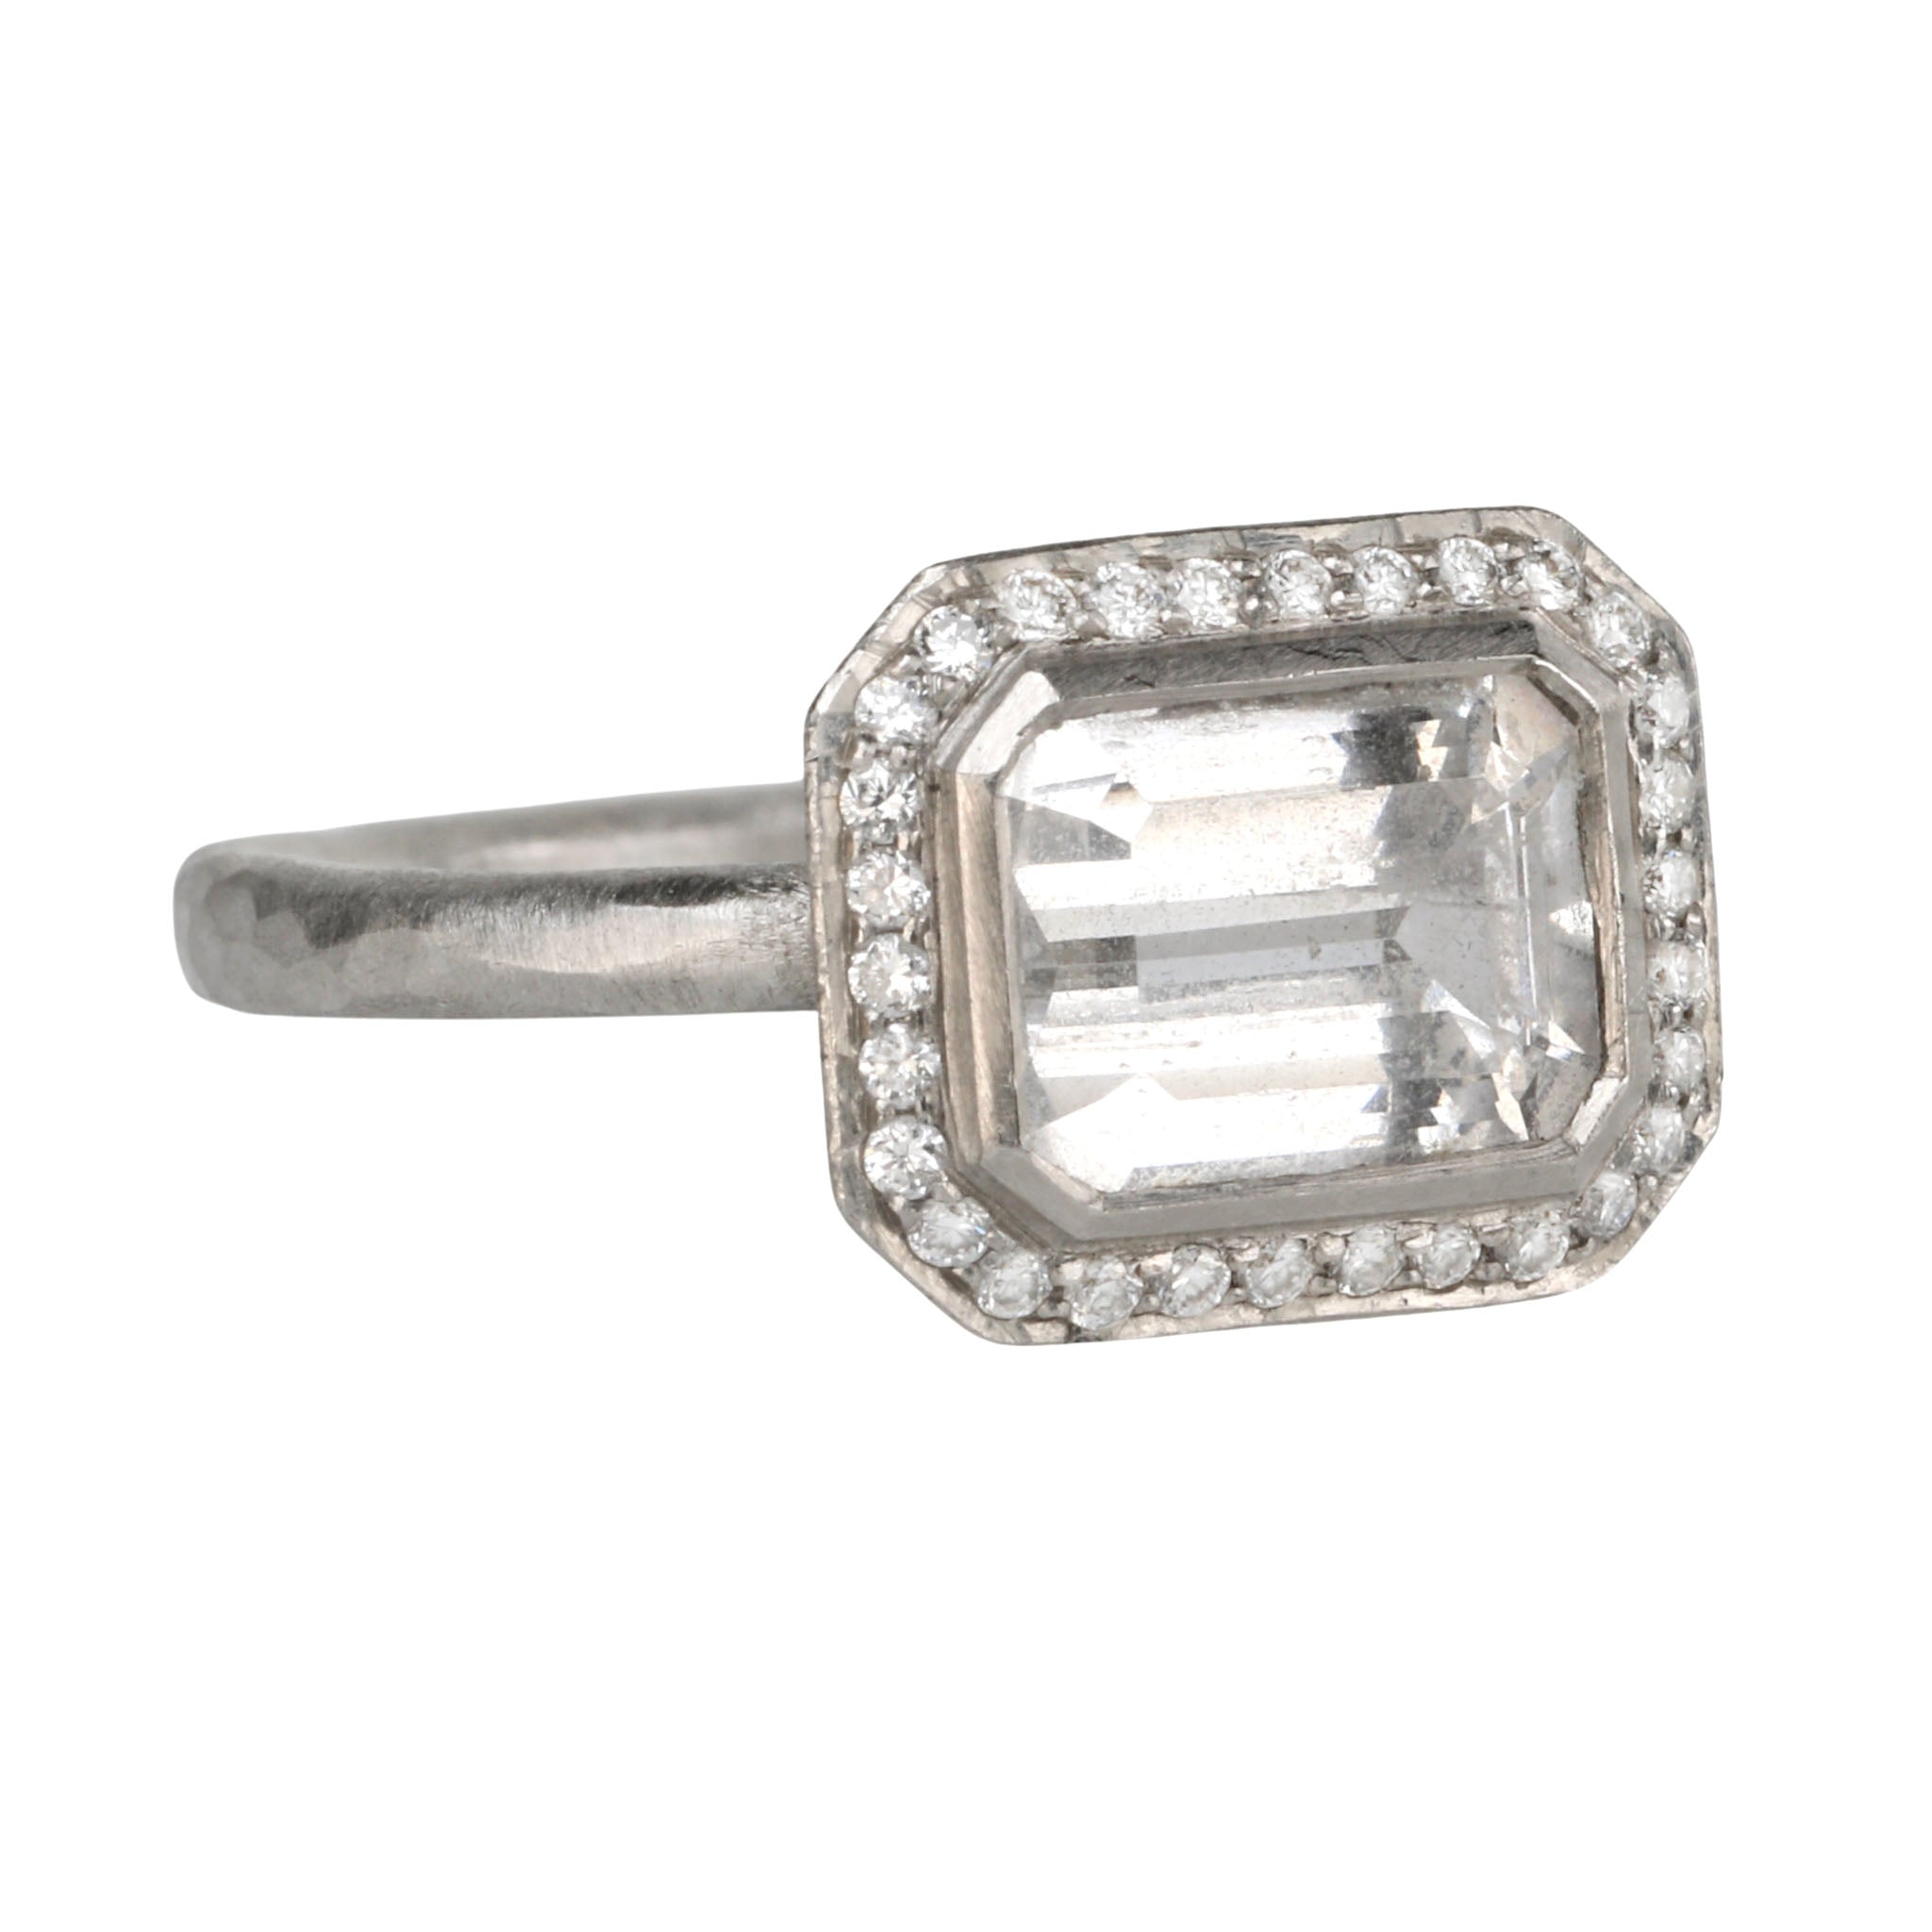 Platinum &amp; East-West Emerald-Cut White Sapphire Ring with Diamonds - Peridot Fine Jewelry - Annie Fensterstock